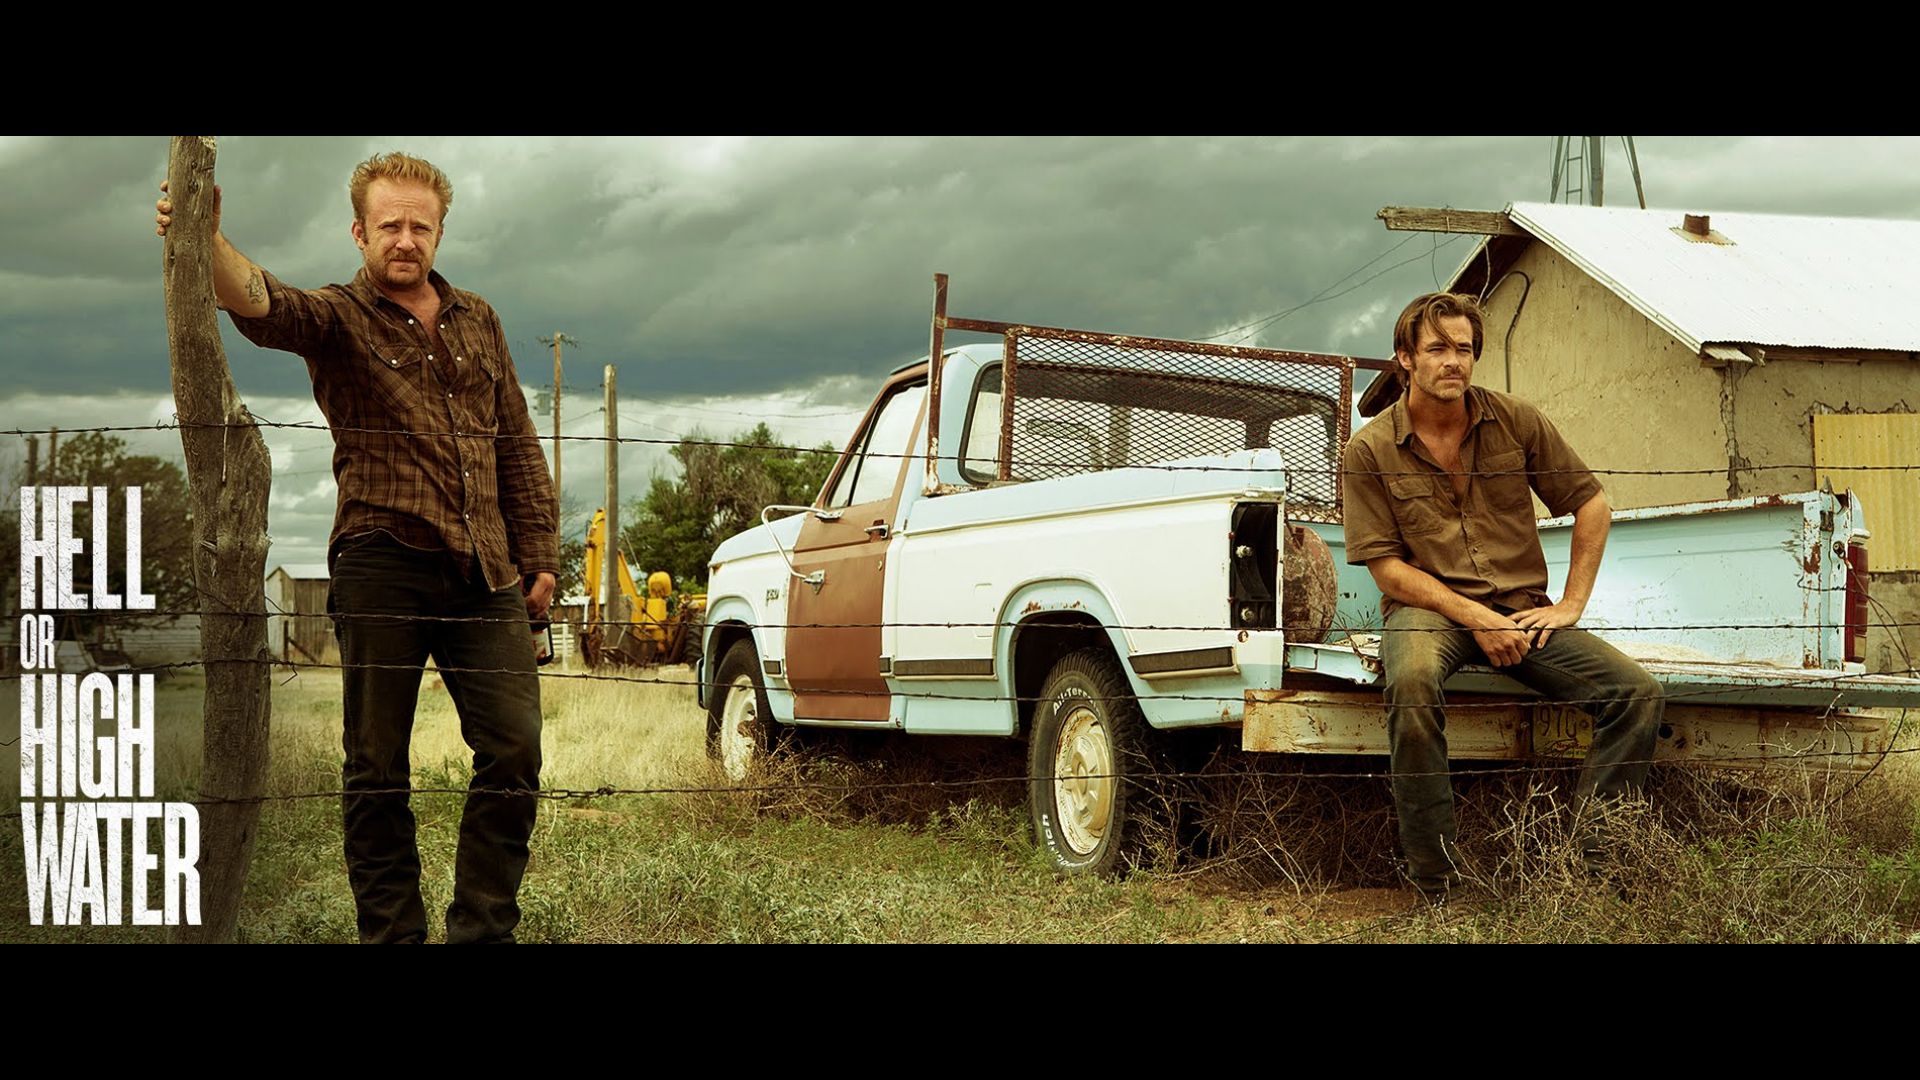 Fascinating first trailer for &#039;Hell or High Water&#039; with Chri